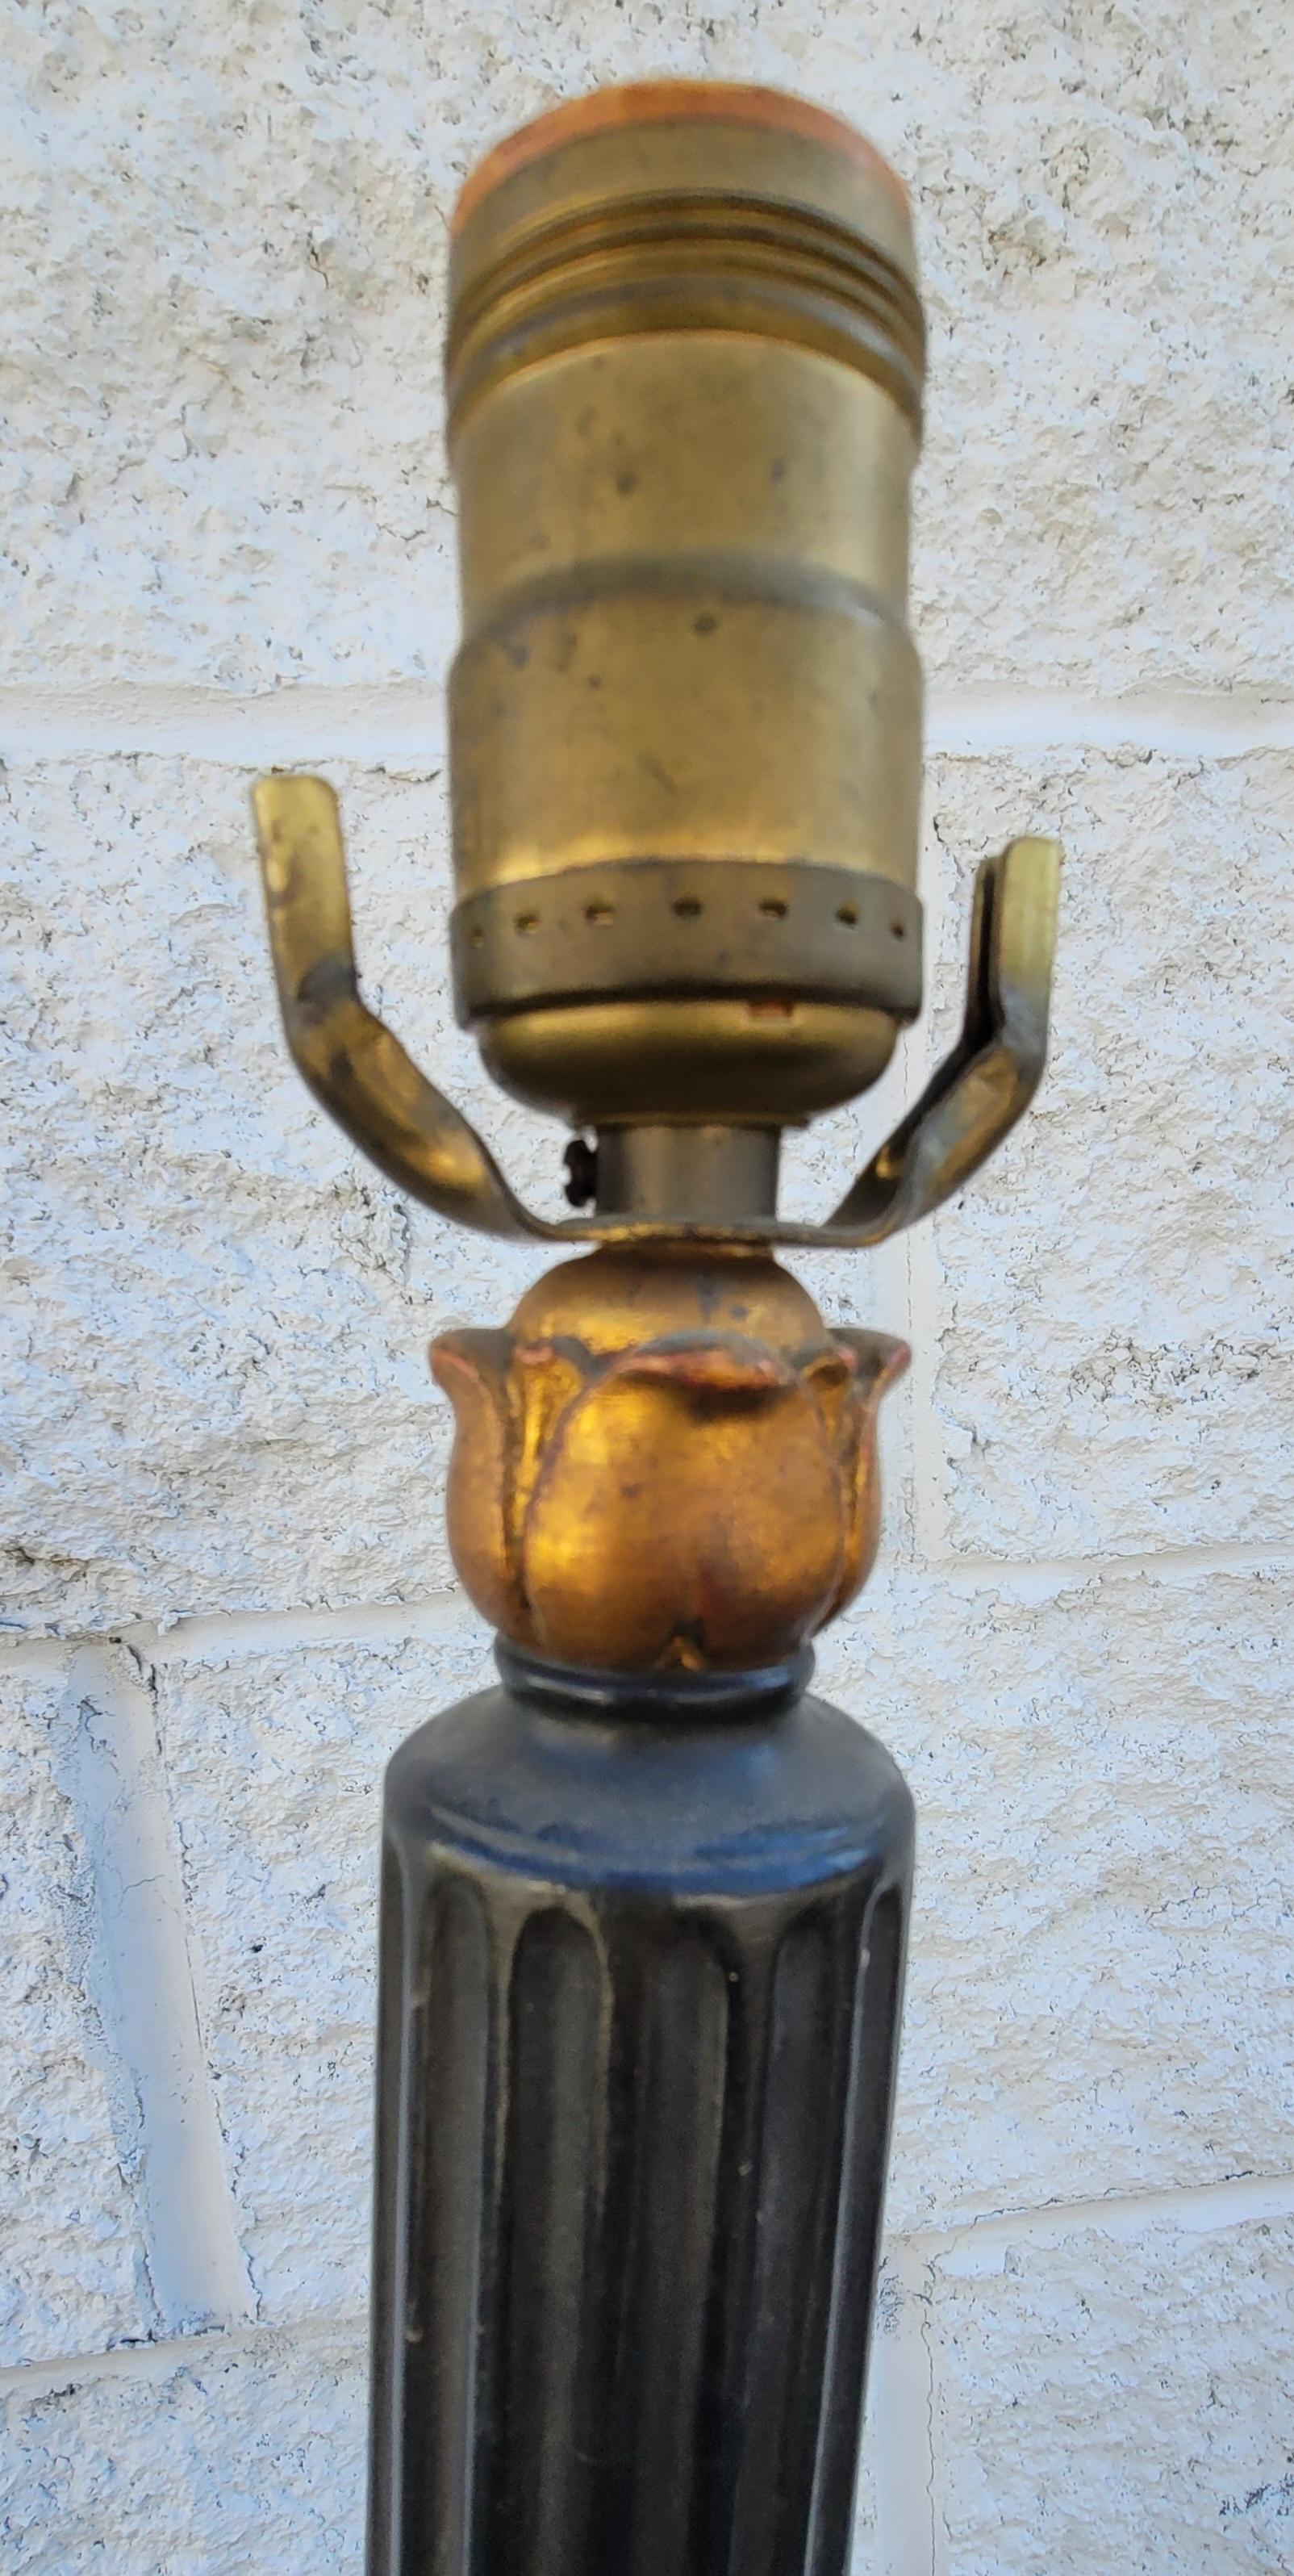  Italian Art Deco Ebonized and Gilt Ornate Plaster Tower Table Lamp In Good Condition For Sale In Germantown, MD